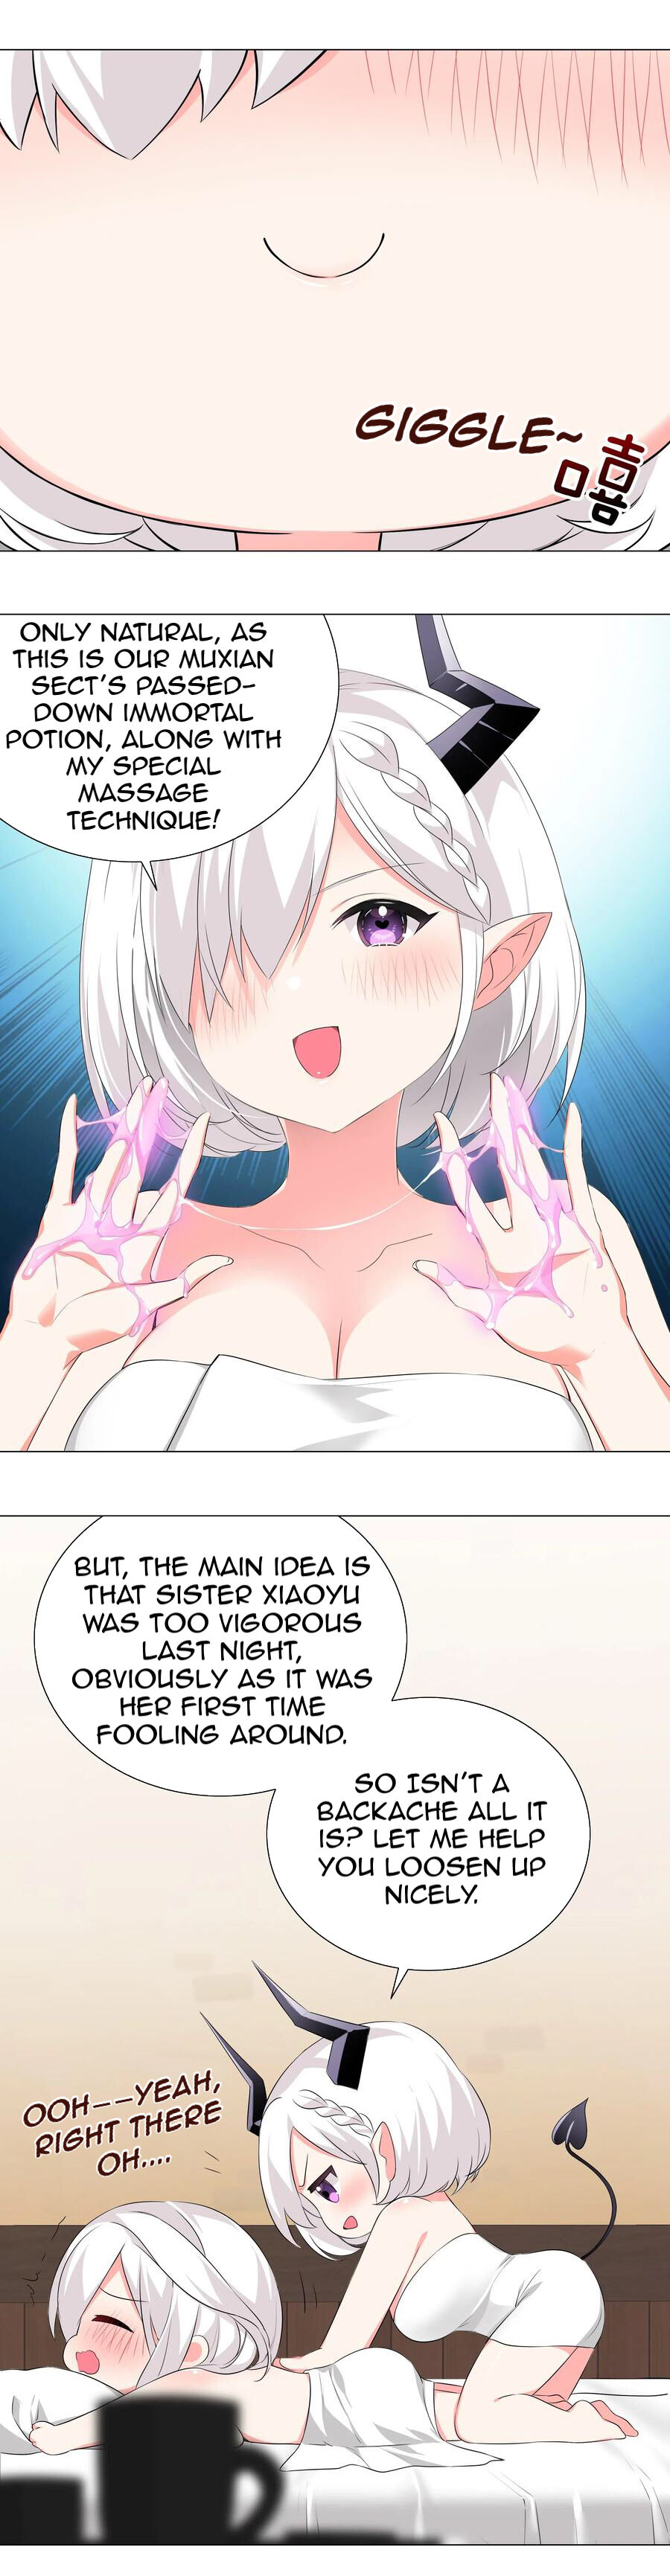 My Harem Grew So Large, I Was Forced To Ascend - Page 3